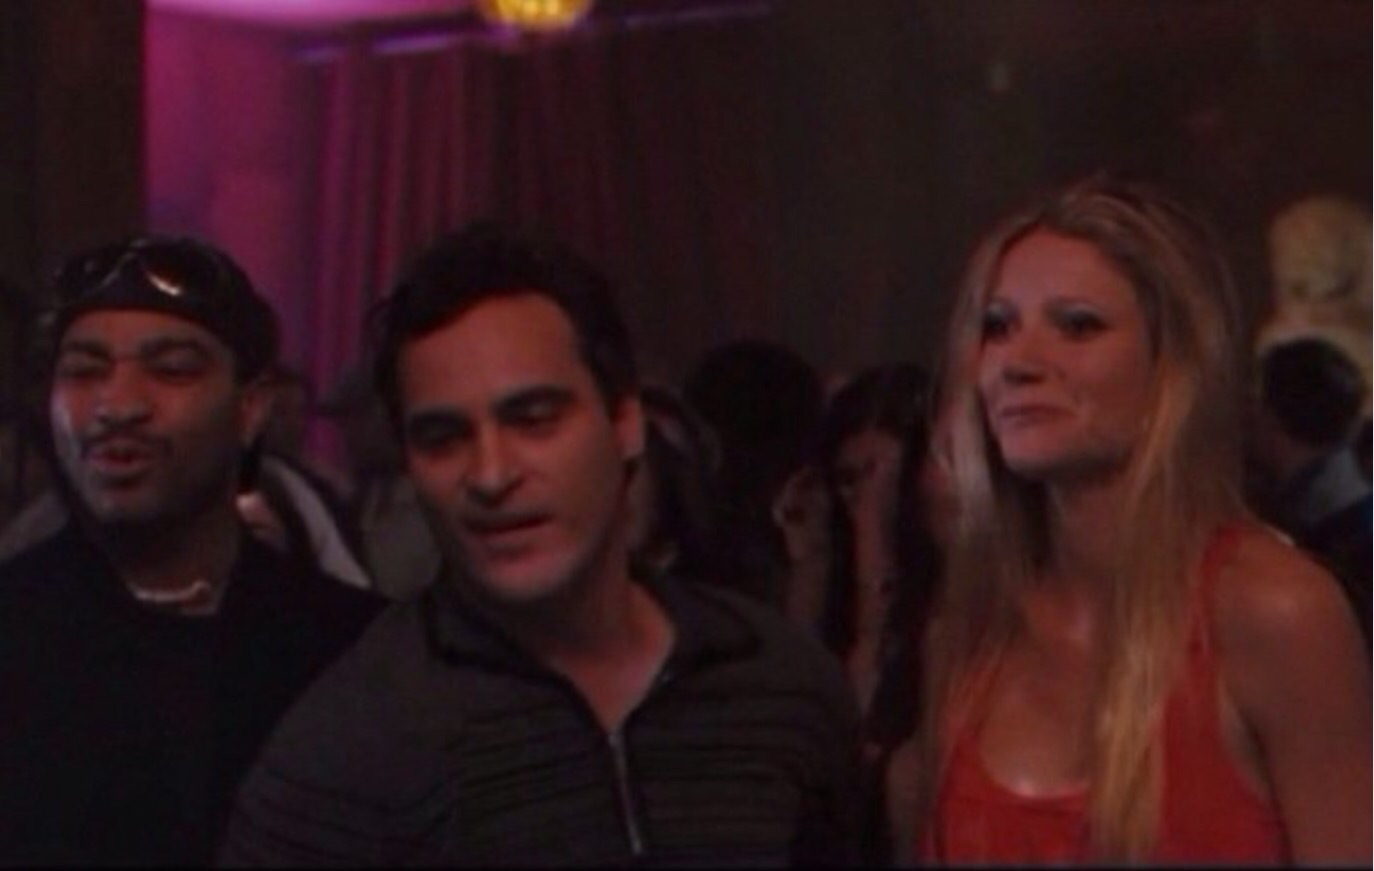 Time to turn up! (Dennis Jay Funny, Joaquin Phoenix, Gwyneth Paltrow) -'Two Lovers' film.